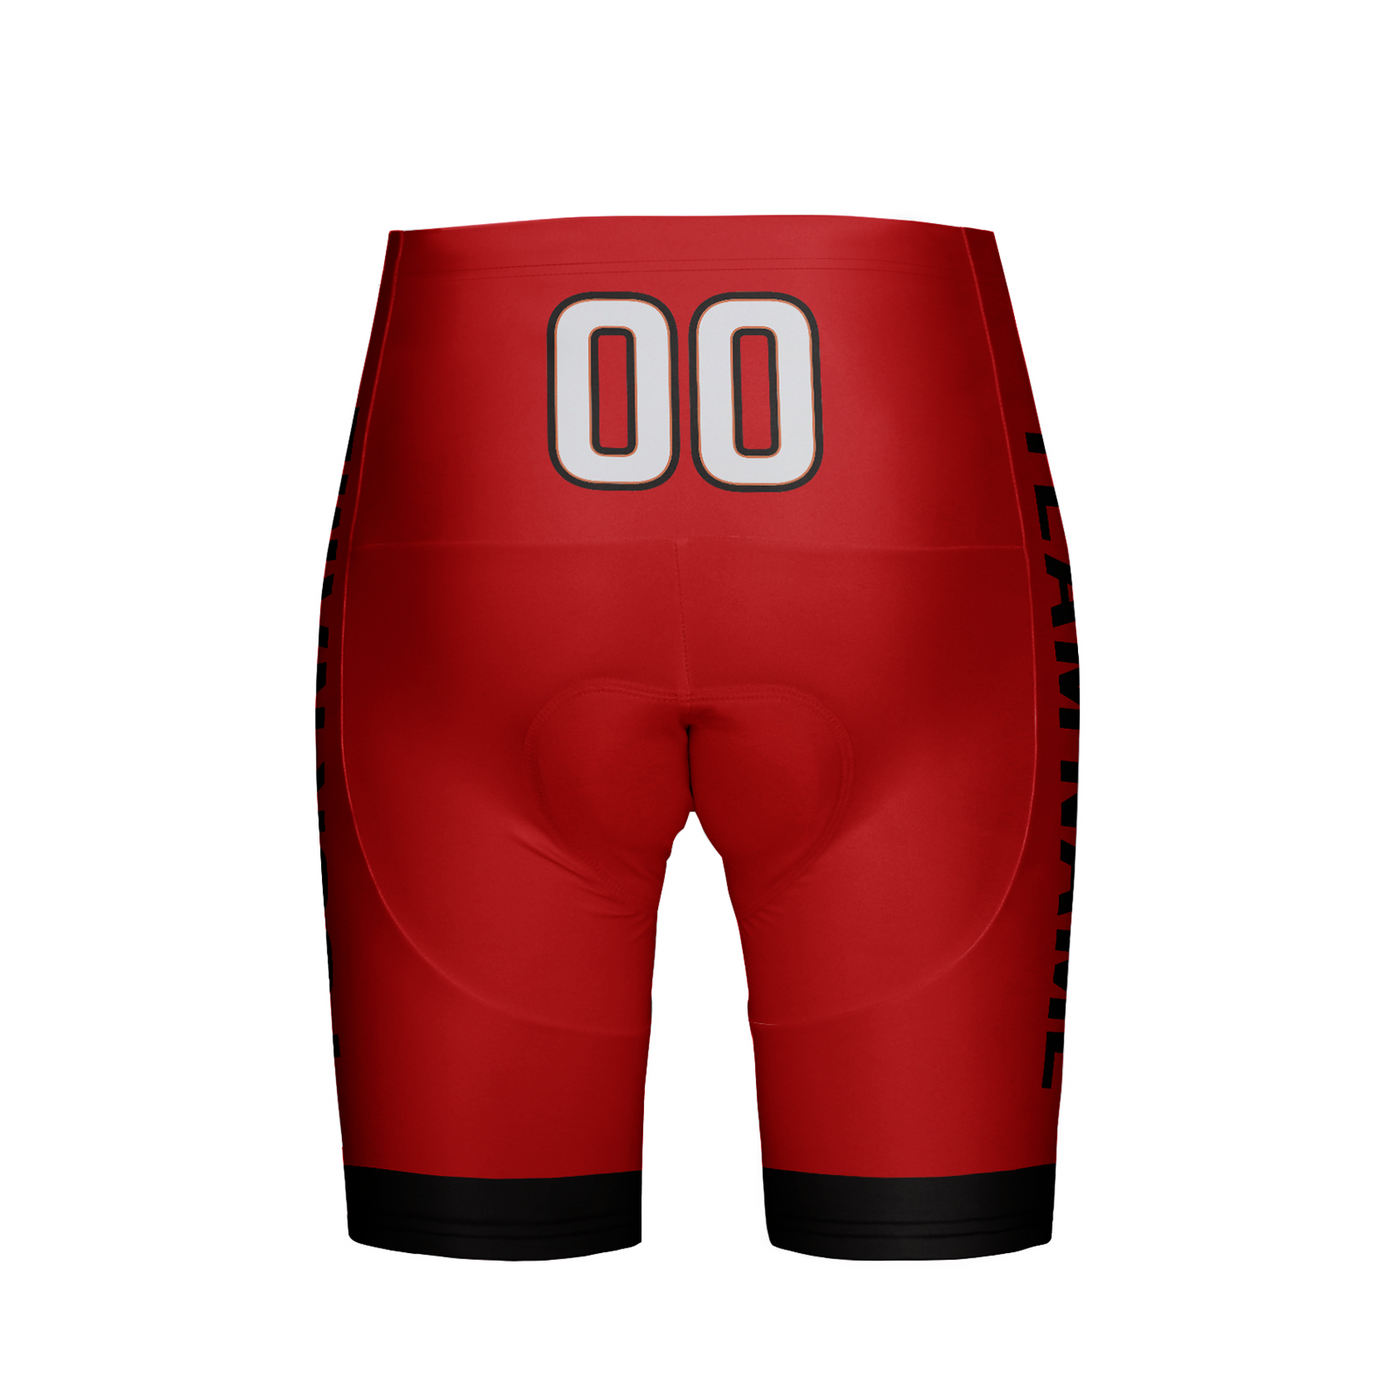 Customized Tampa Bay Team Unisex Cycling Shorts